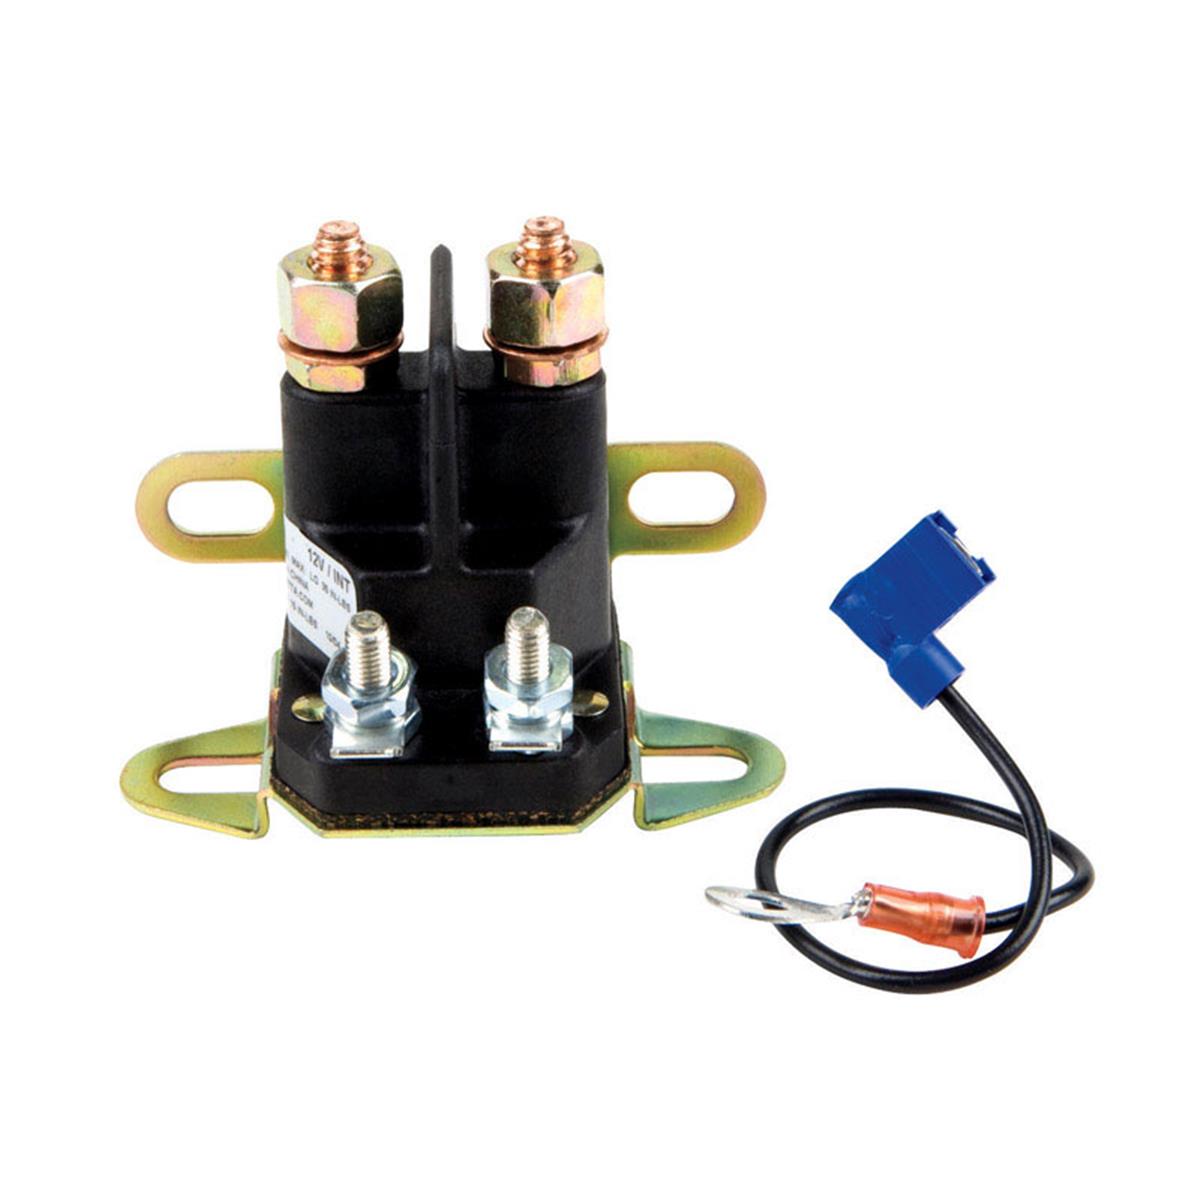 Picture of Mtd Products 490-250-0013 12 V Universal Lawn Tractor Solenoid